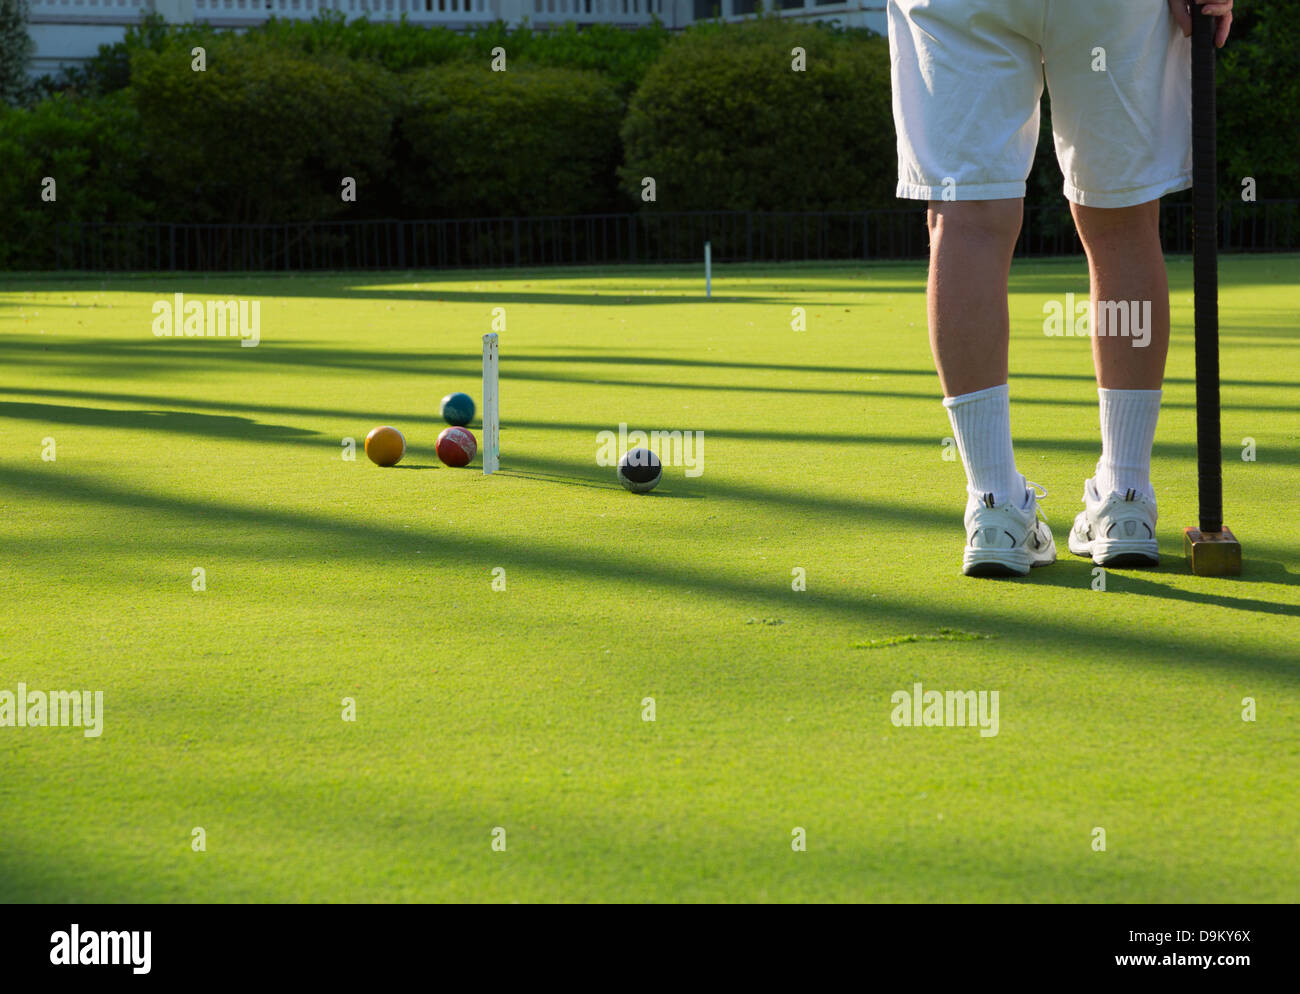 A Game of Golf Croquet. A player watches as another player's ball nears the wicket. Stock Photo